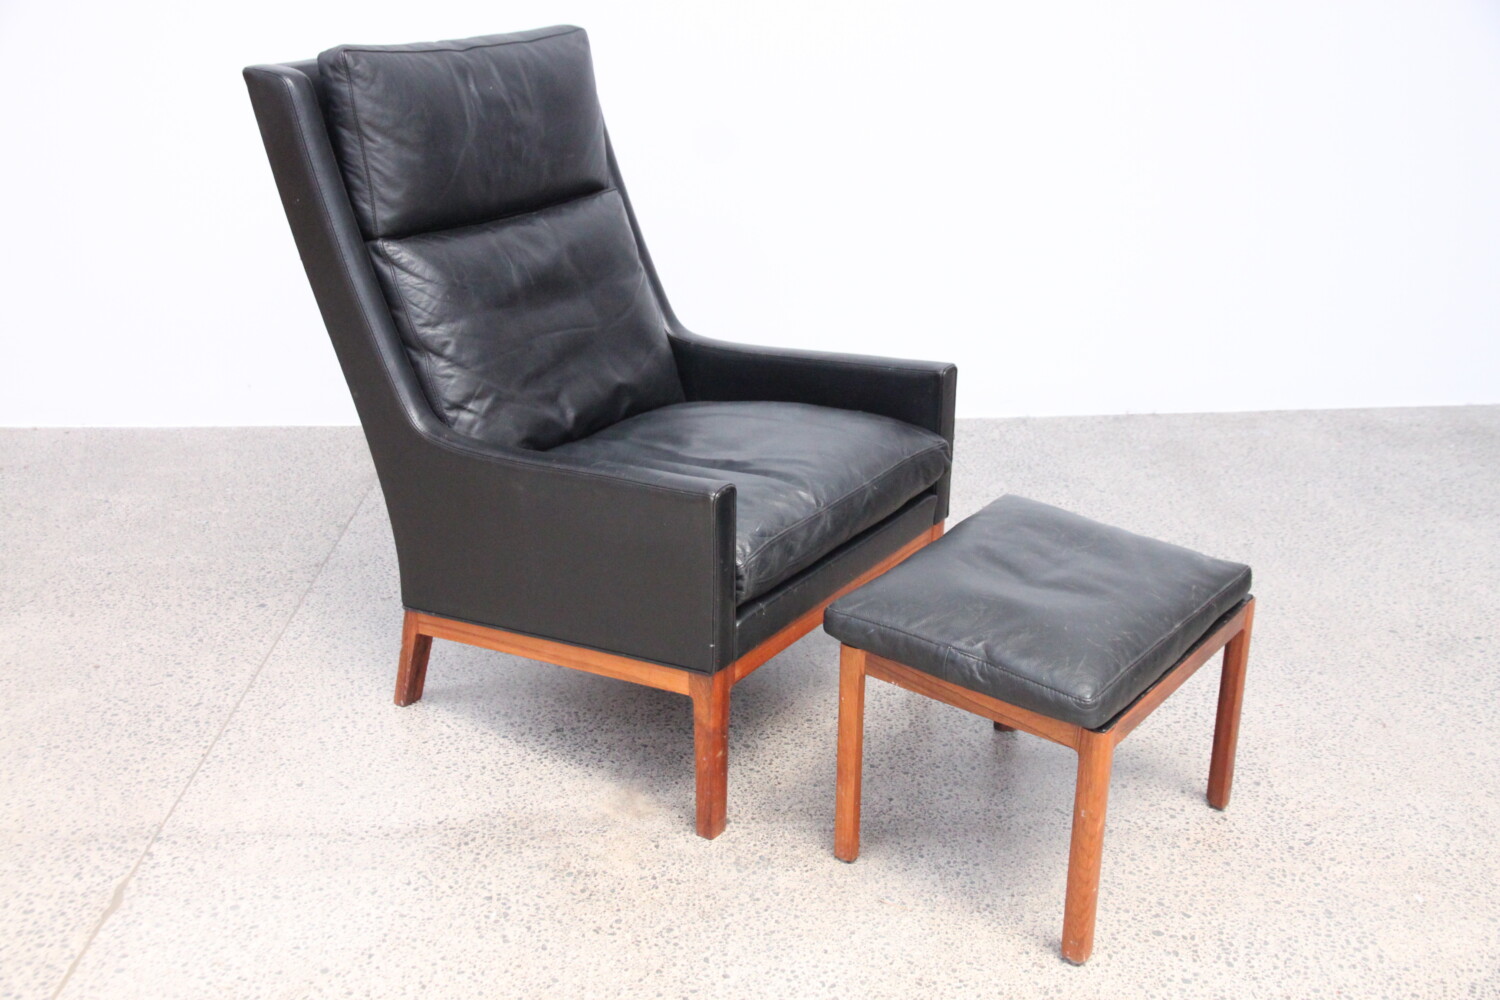 Leather & Rosewood Chair and Footstool